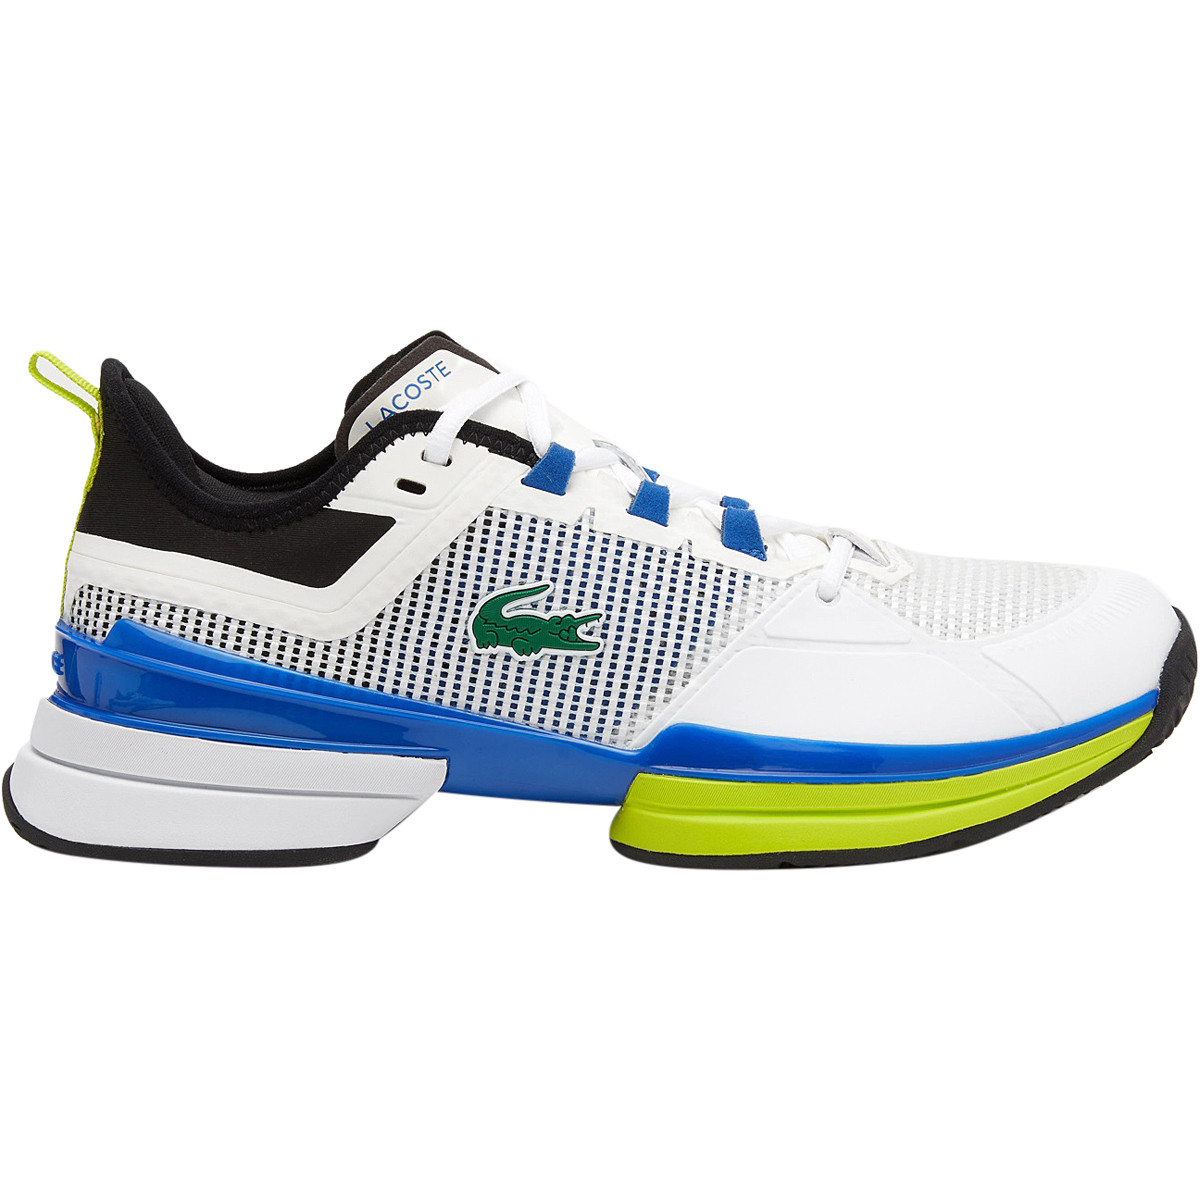 CHAUSSURES LACOSTE AG-LT ULTRA TOUTES SURFACES - LACOSTE - Homme -  Chaussures